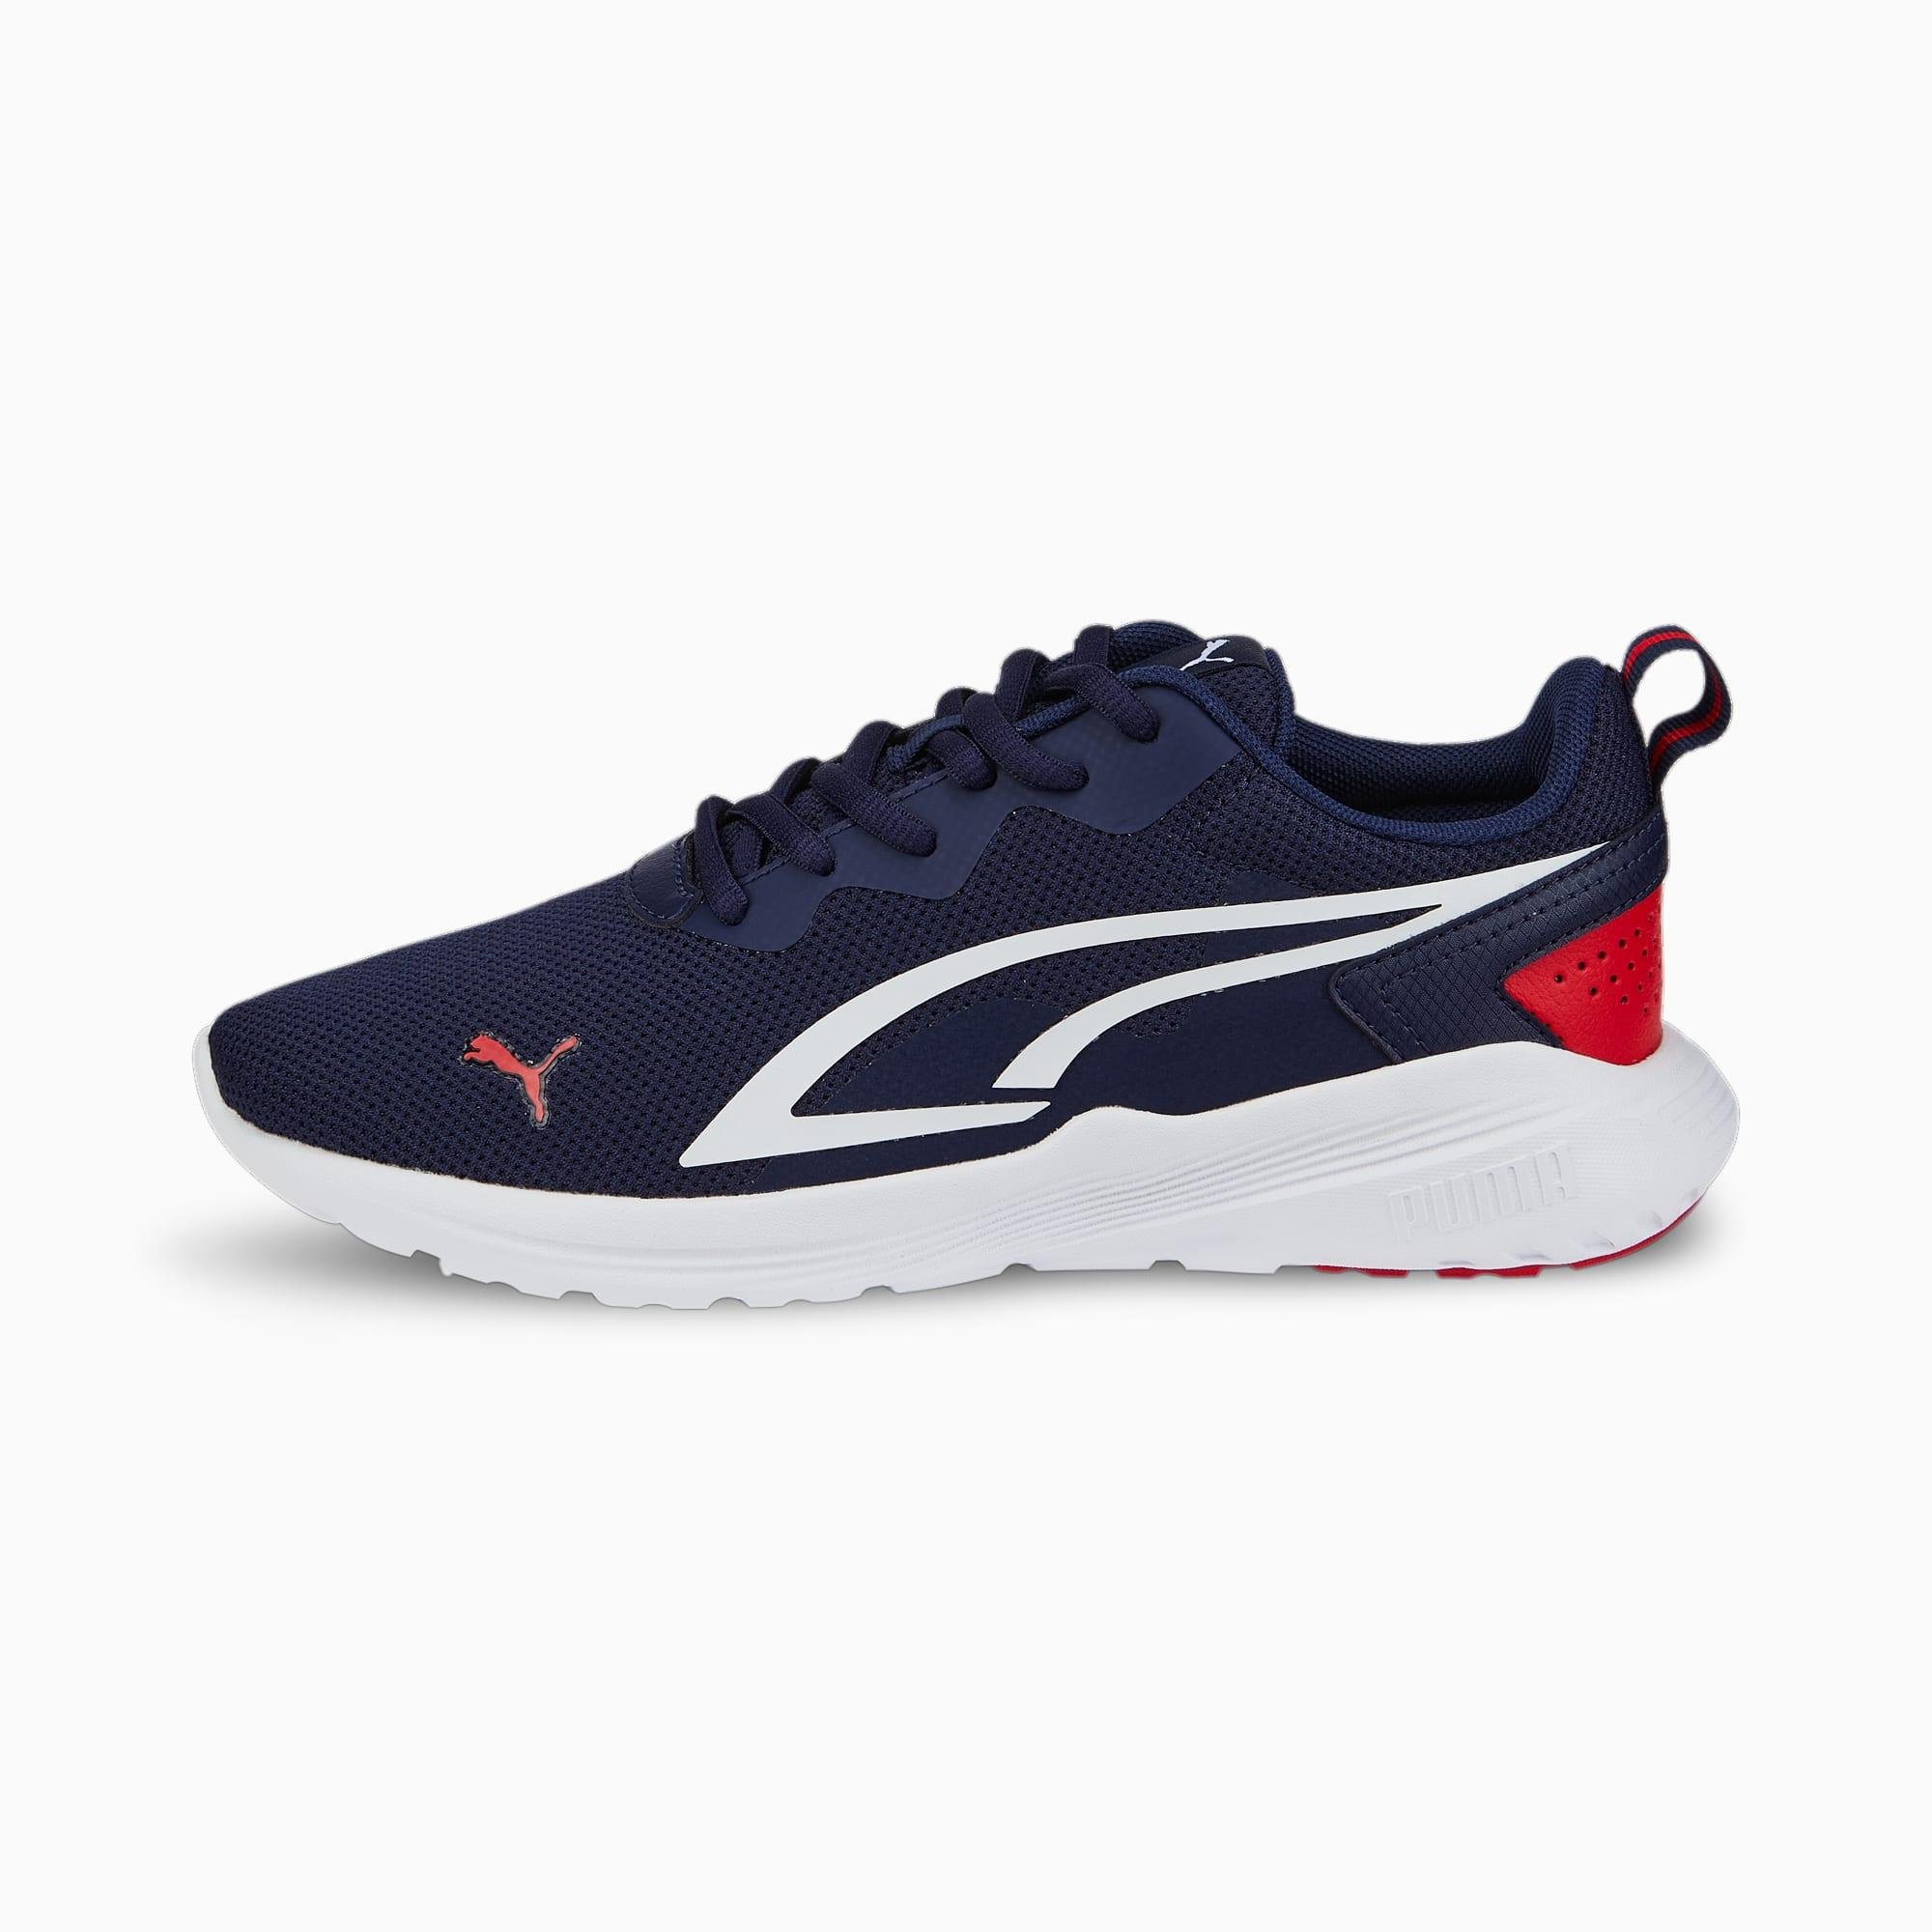 All-Day Active Big Kids' Sneakers by PUMA